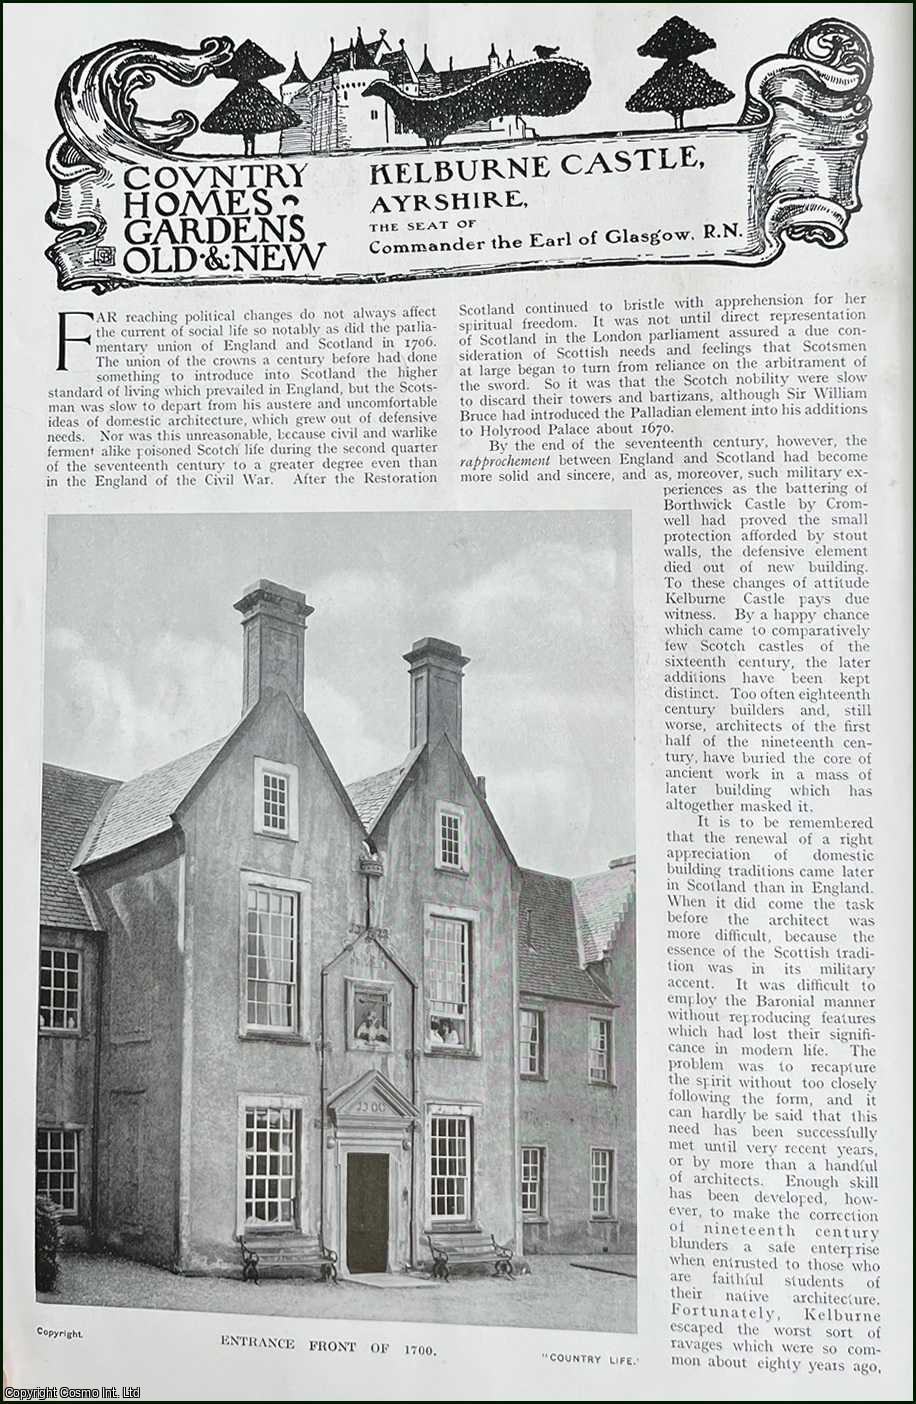 Country Life Magazine - Kelburne Castle, Ayrshire. Several pictures and accompanying text, removed from an original issue of Country Life Magazine, 1916.